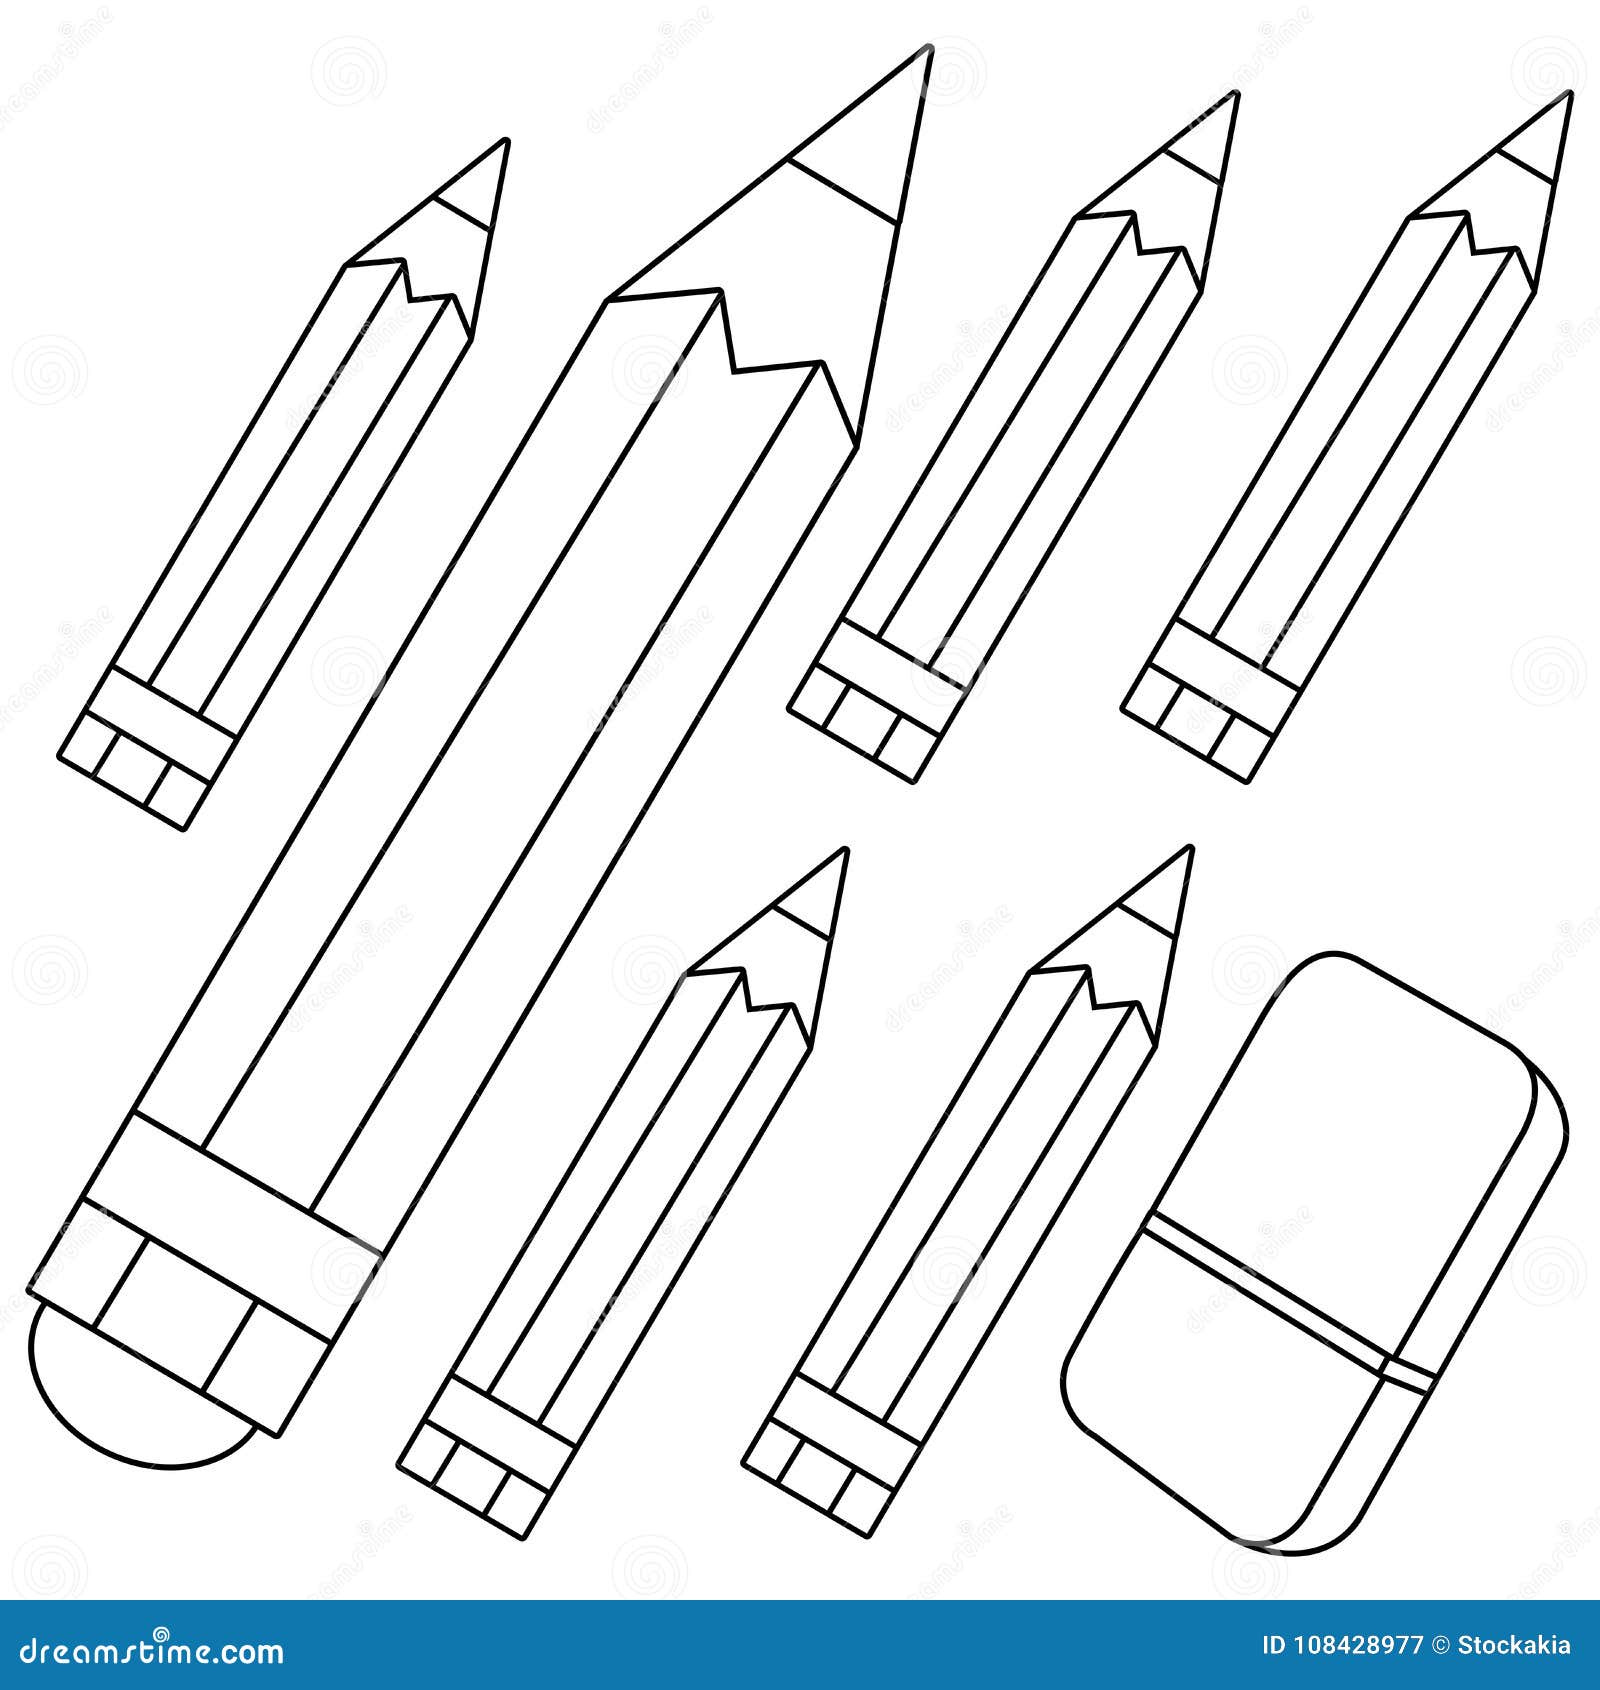 Colored Pencils and Eraser. Vector Black and White Coloring Page